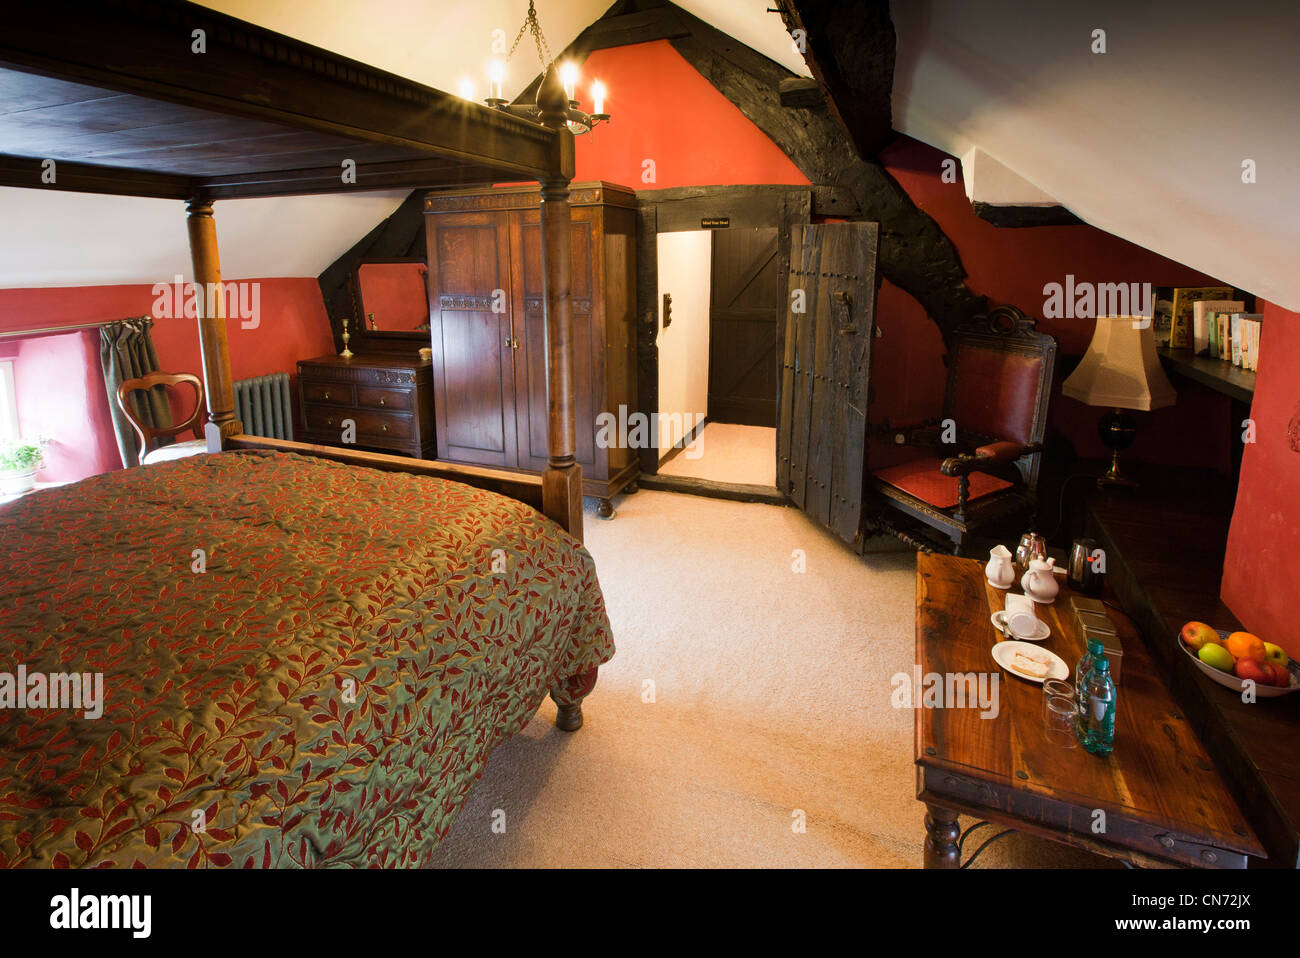 Uk Cumbria Lake District Coniston Yew Tree Farm Interior Historic Bedroom Converted To En Suite Bed And Breakfast Room Stock Photo Alamy